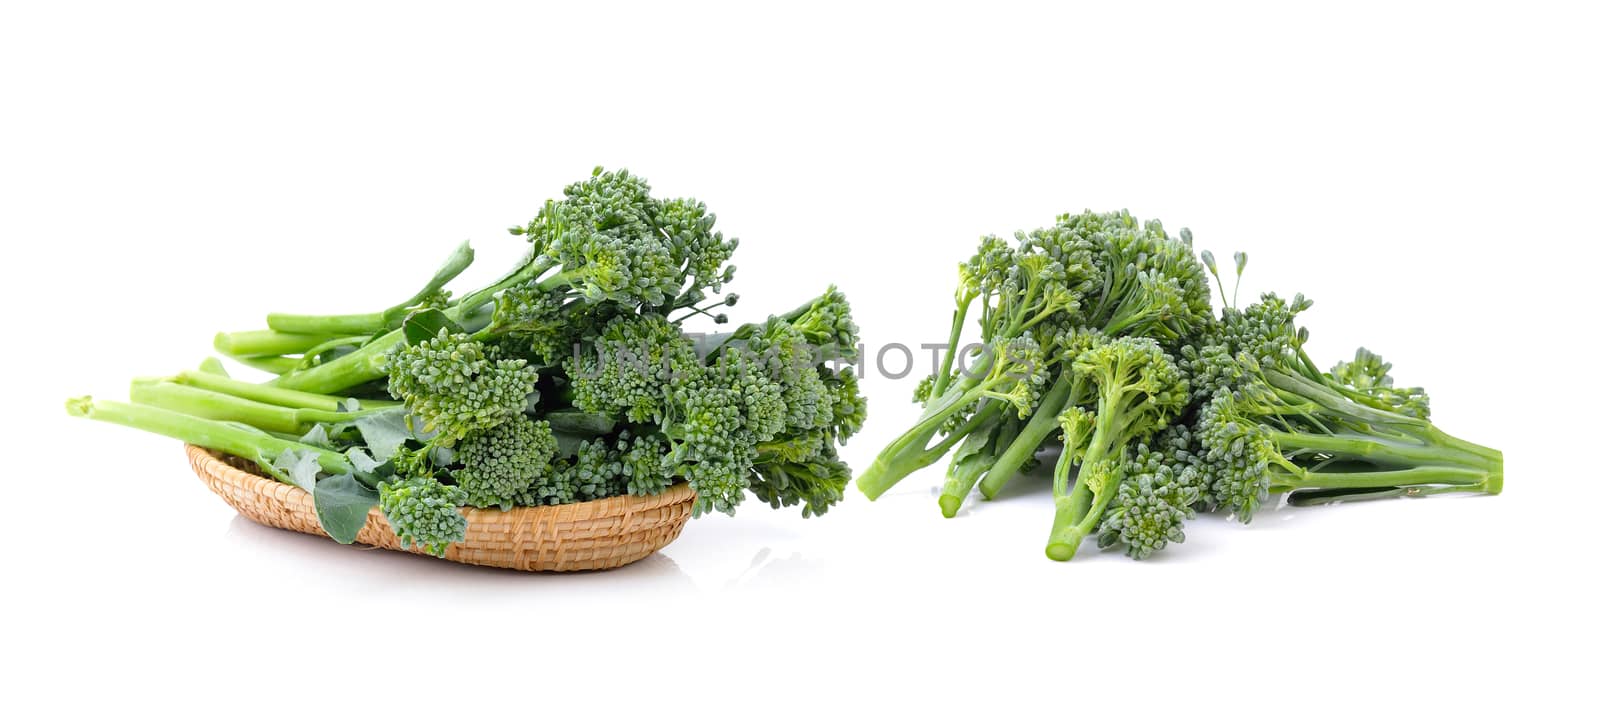 Broccoli on white background by sommai